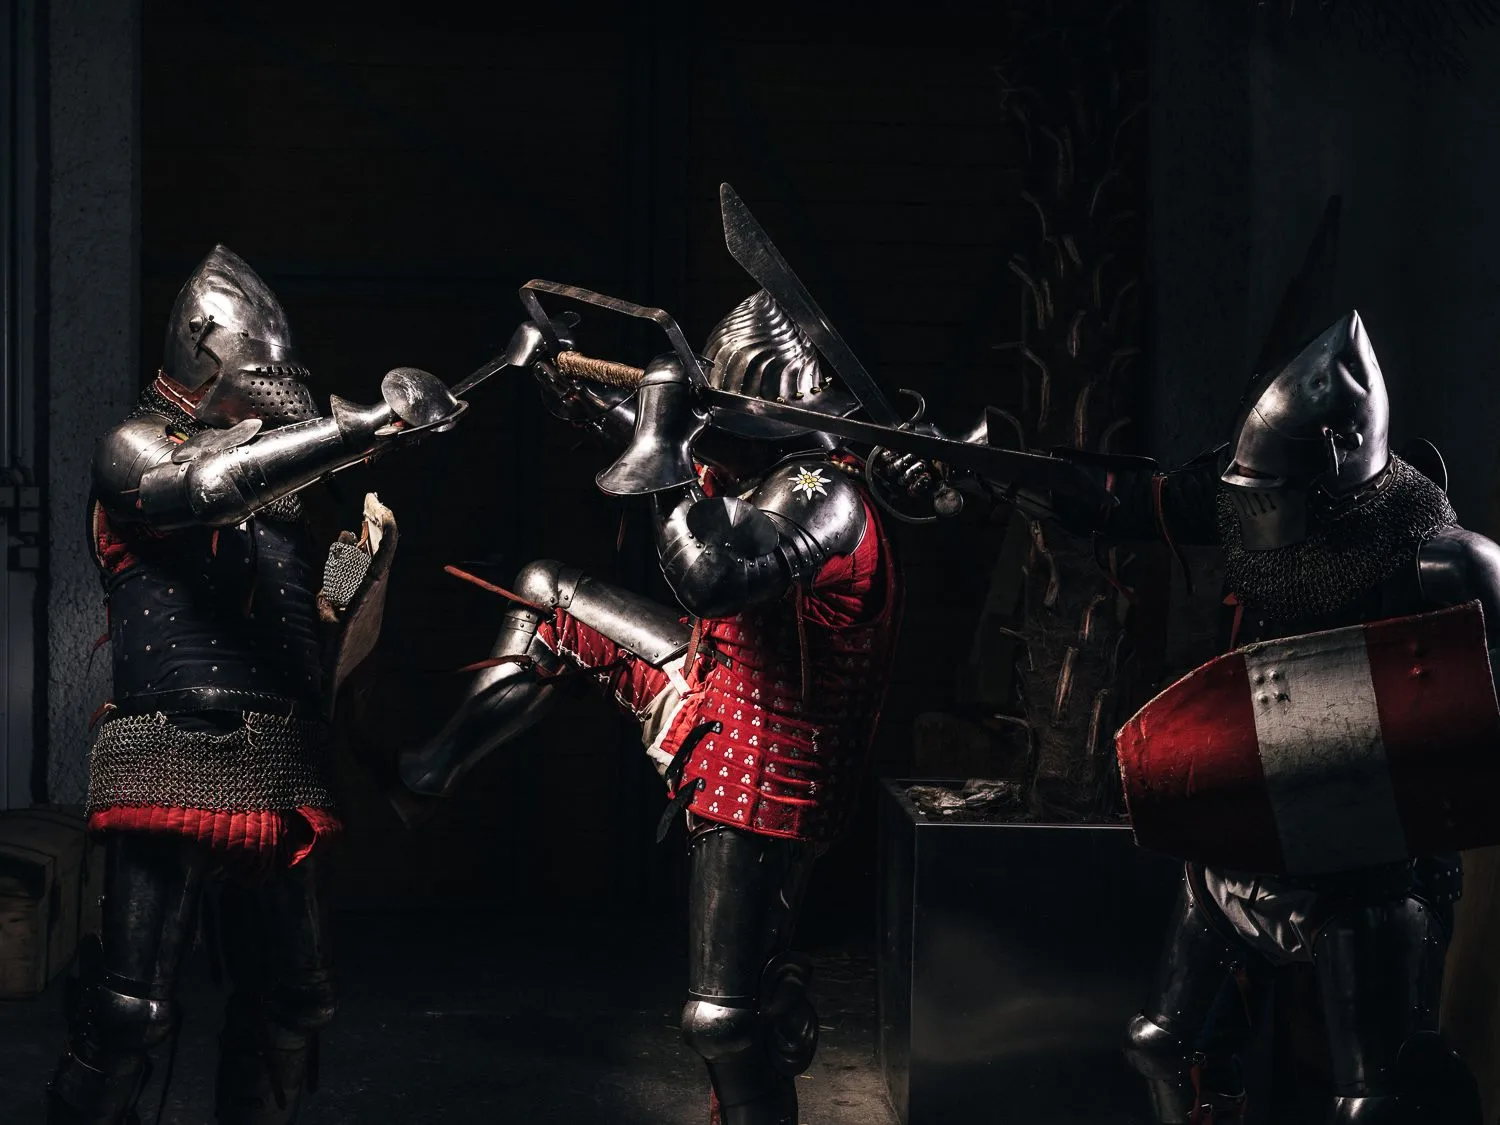 a group of men in armor holding swords